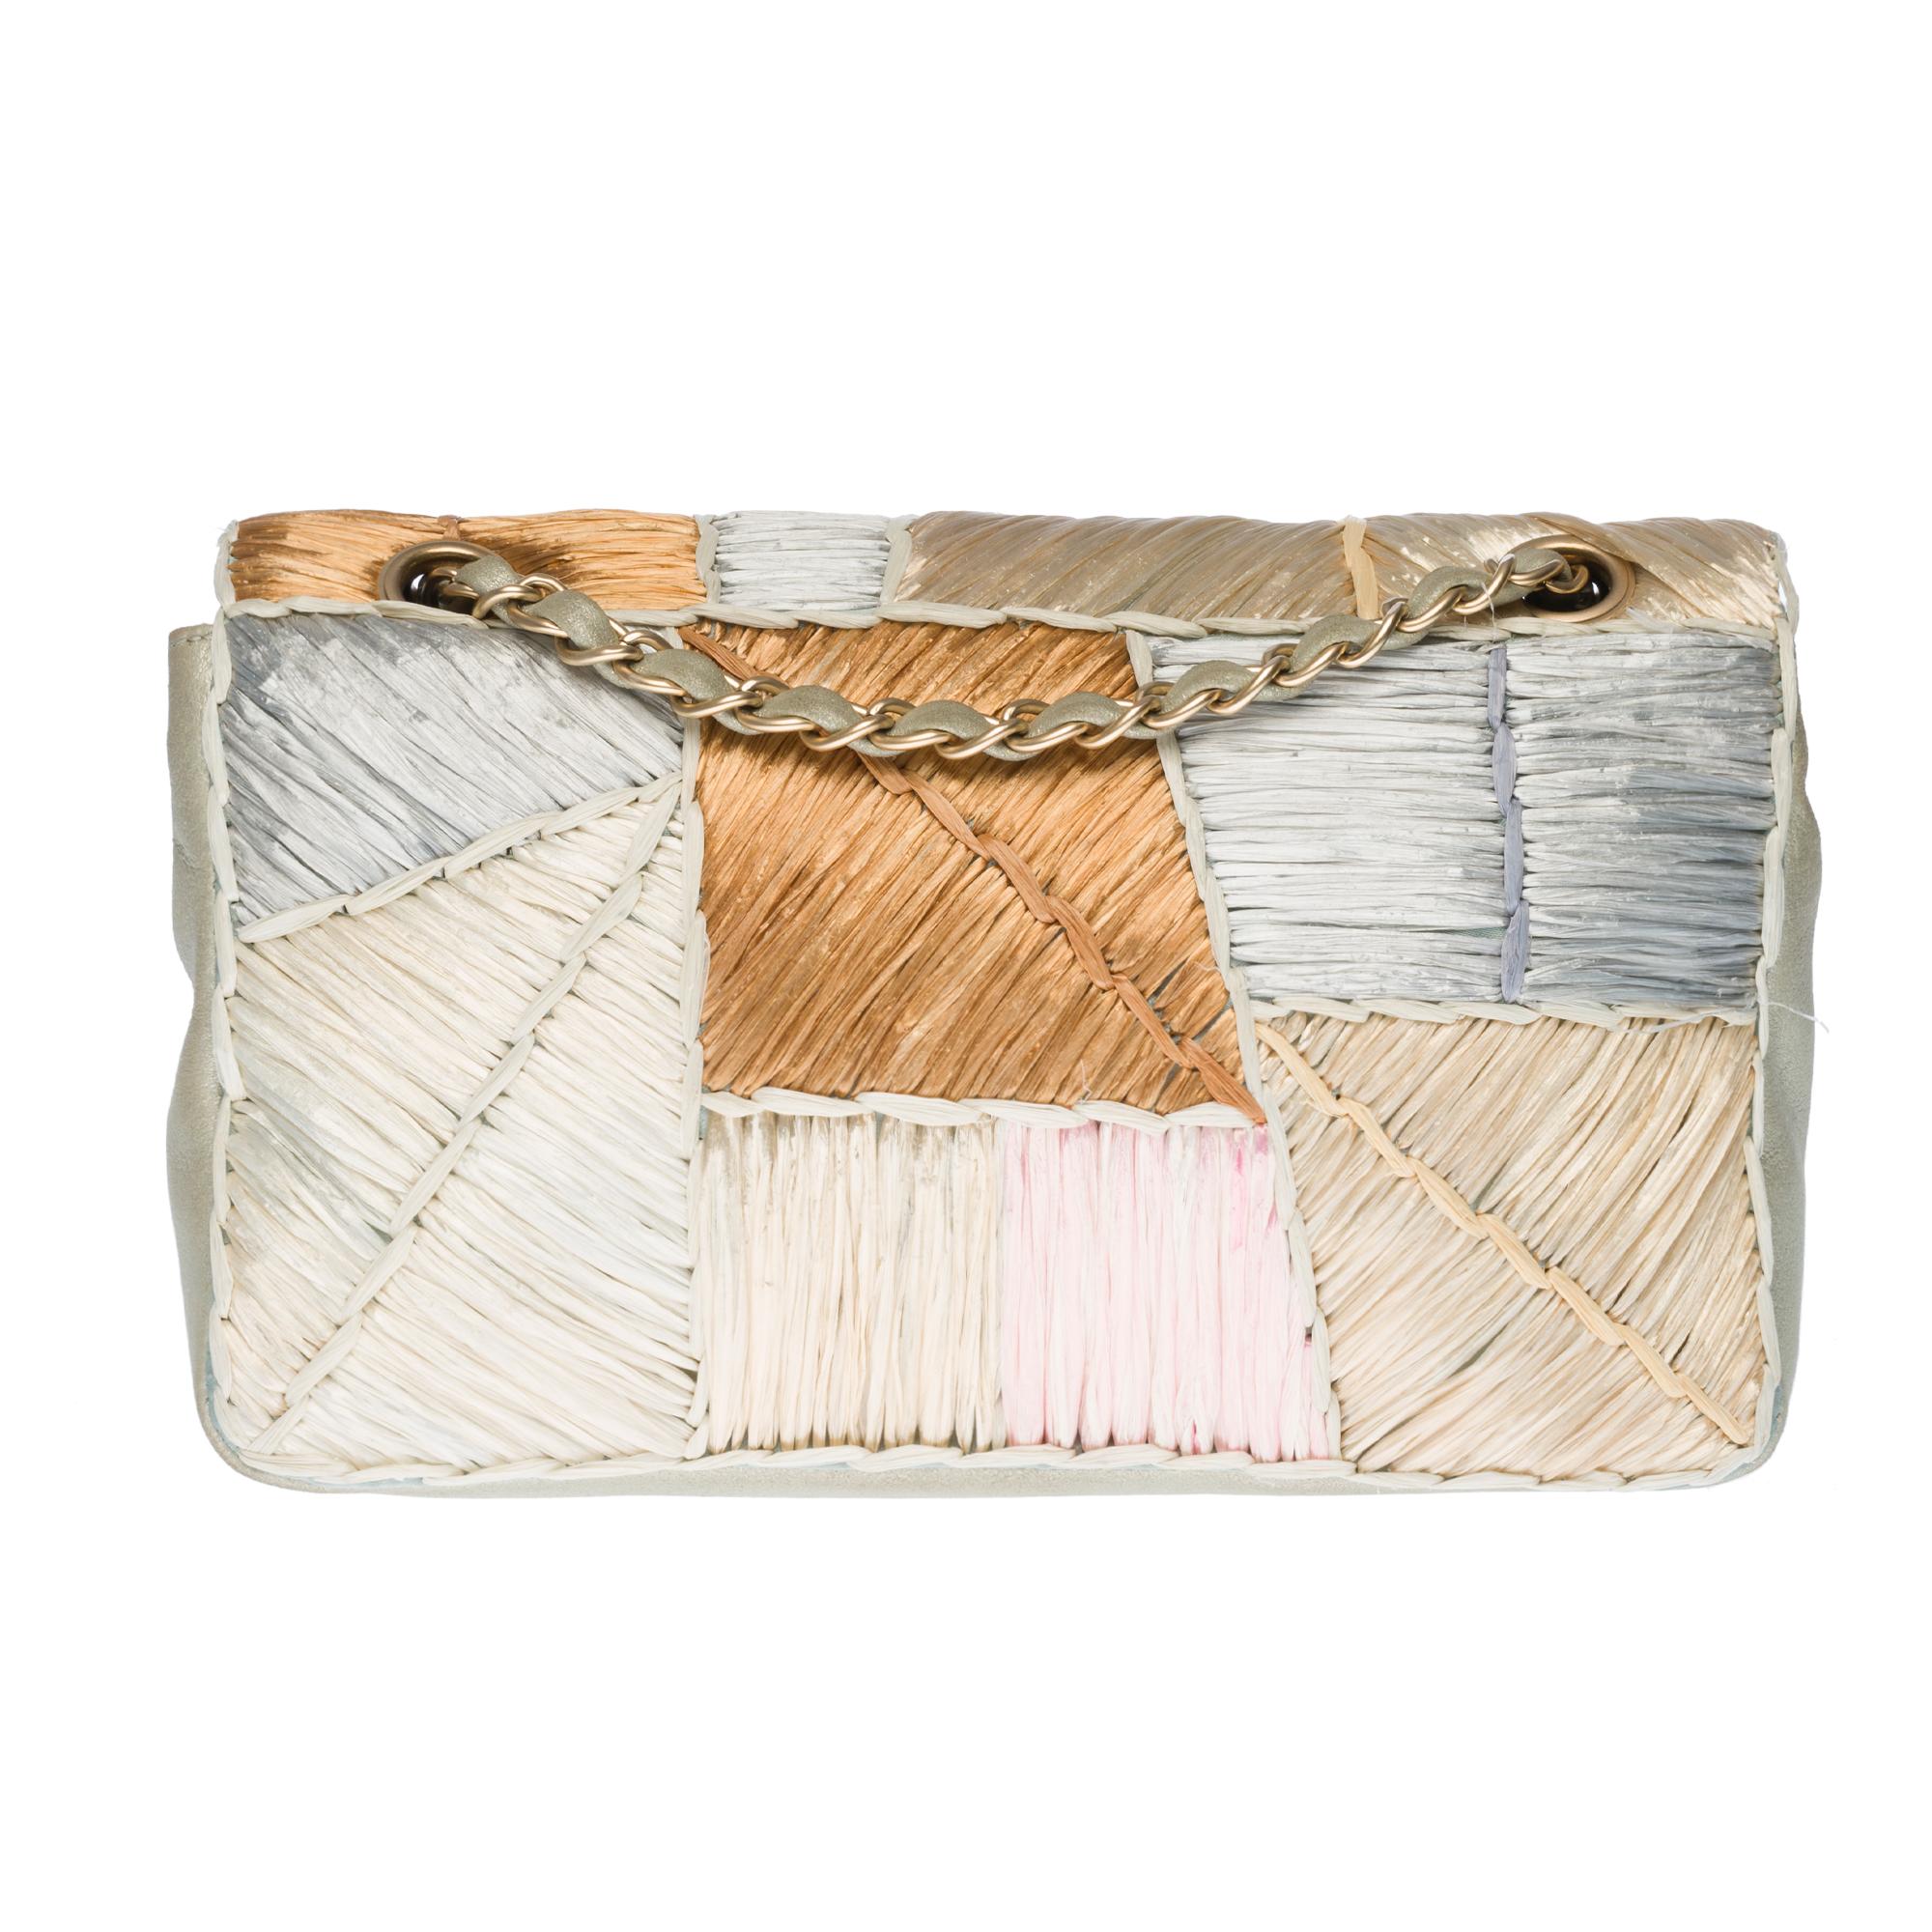 Creme and multicolor patchwork raffia Chanel Classic Flap bag with brushed gold-tone hardware, single convertible chain-link and leather shoulder strap, metallic silver leather leather trim, seafoam satin lining, dual pockets at interior wall; one